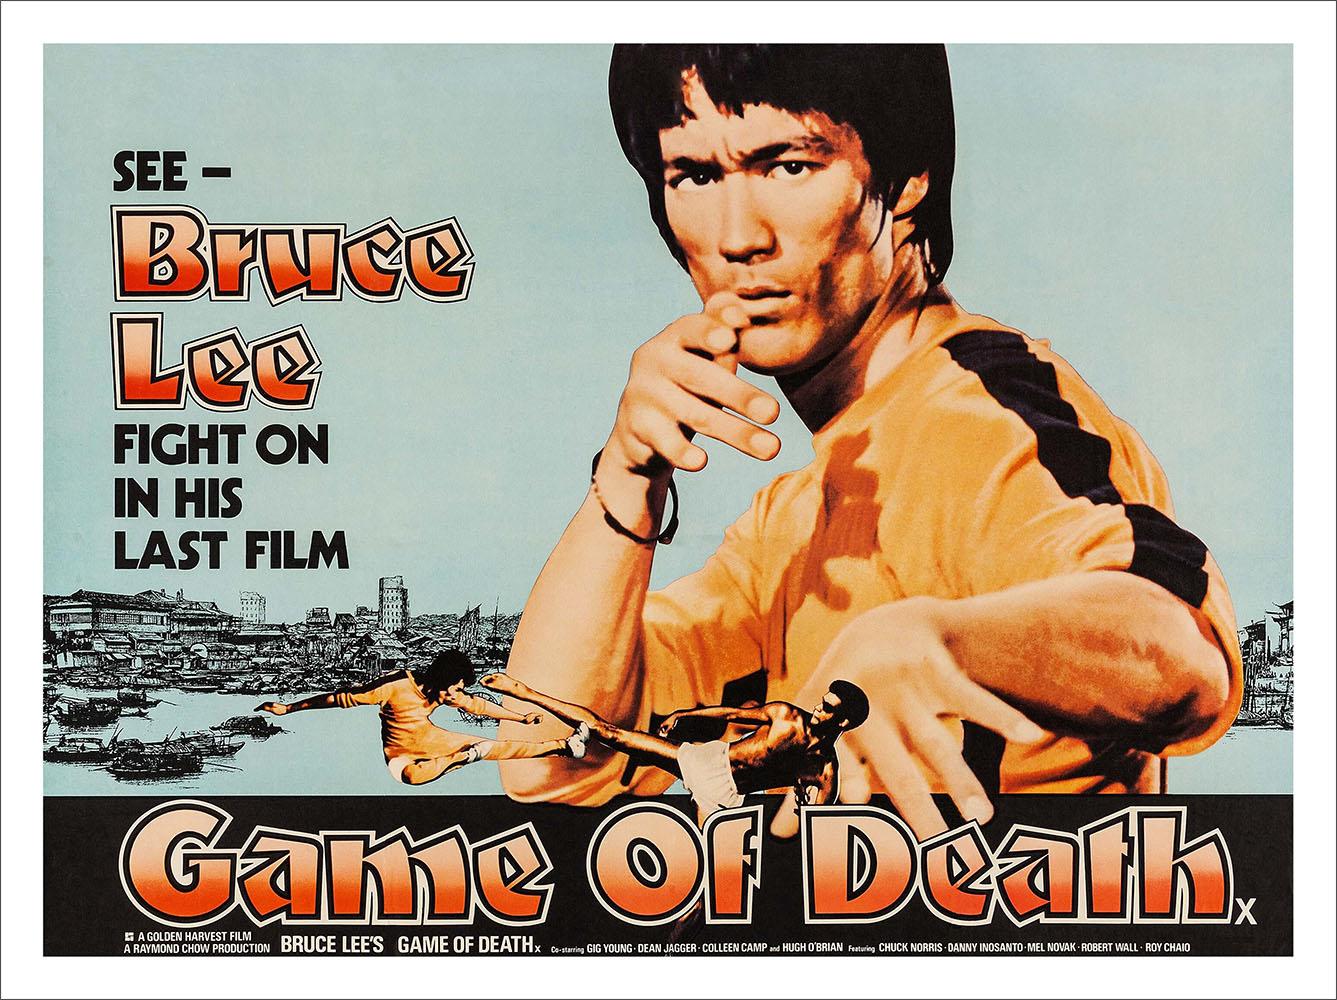 Bruce Lee Game Of Death Poster